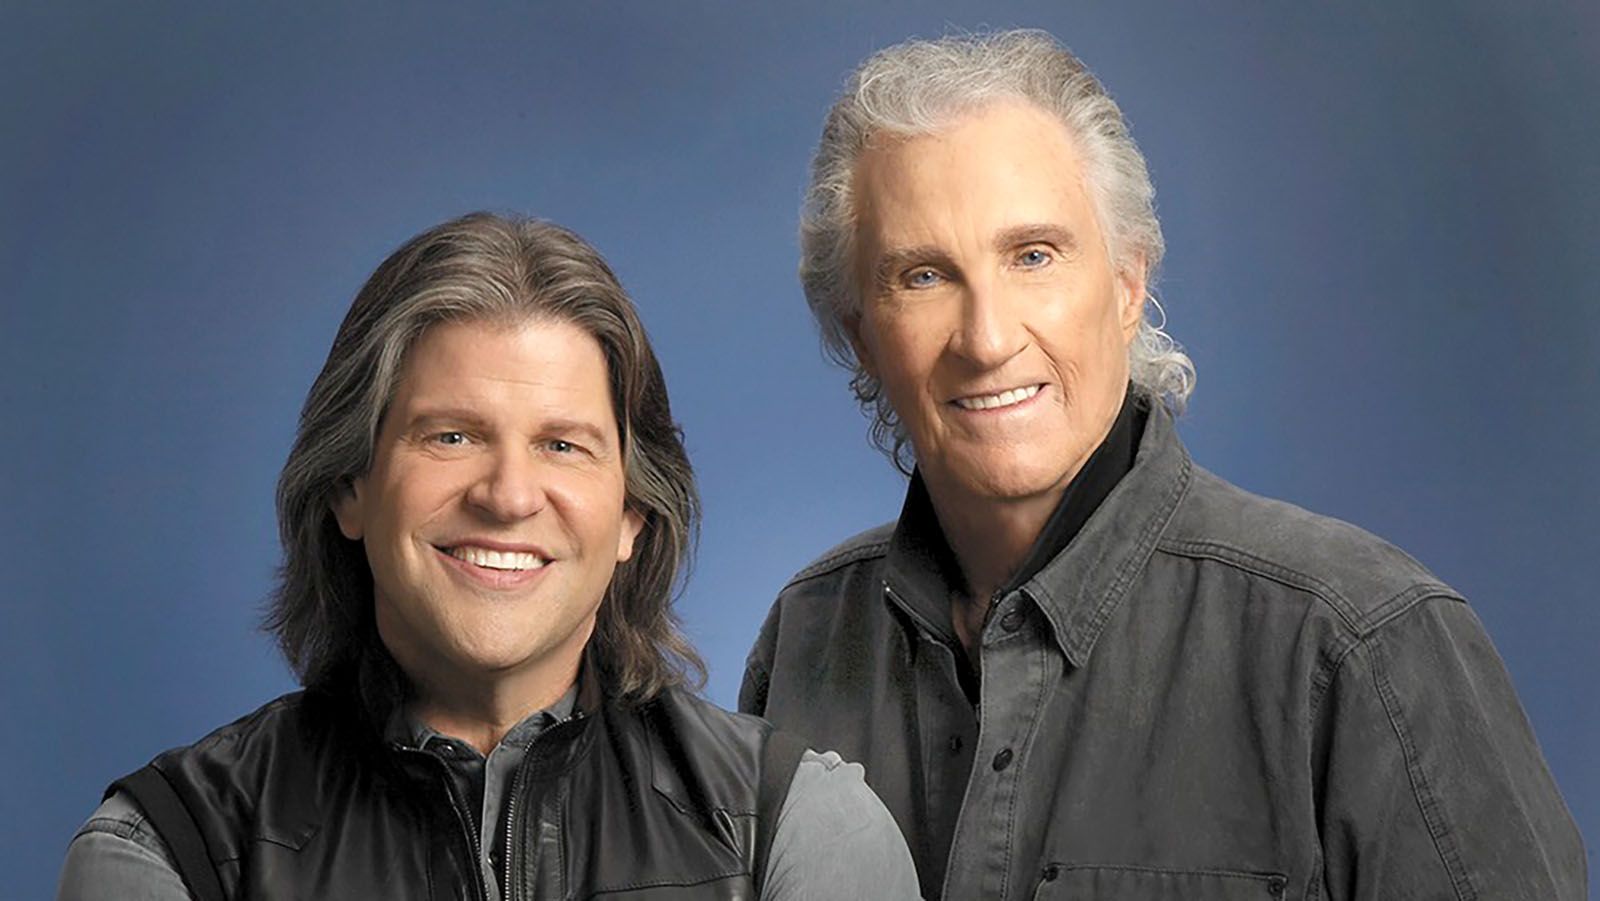 The Righteous Brothers will be at The Clyde on Dec. 17.